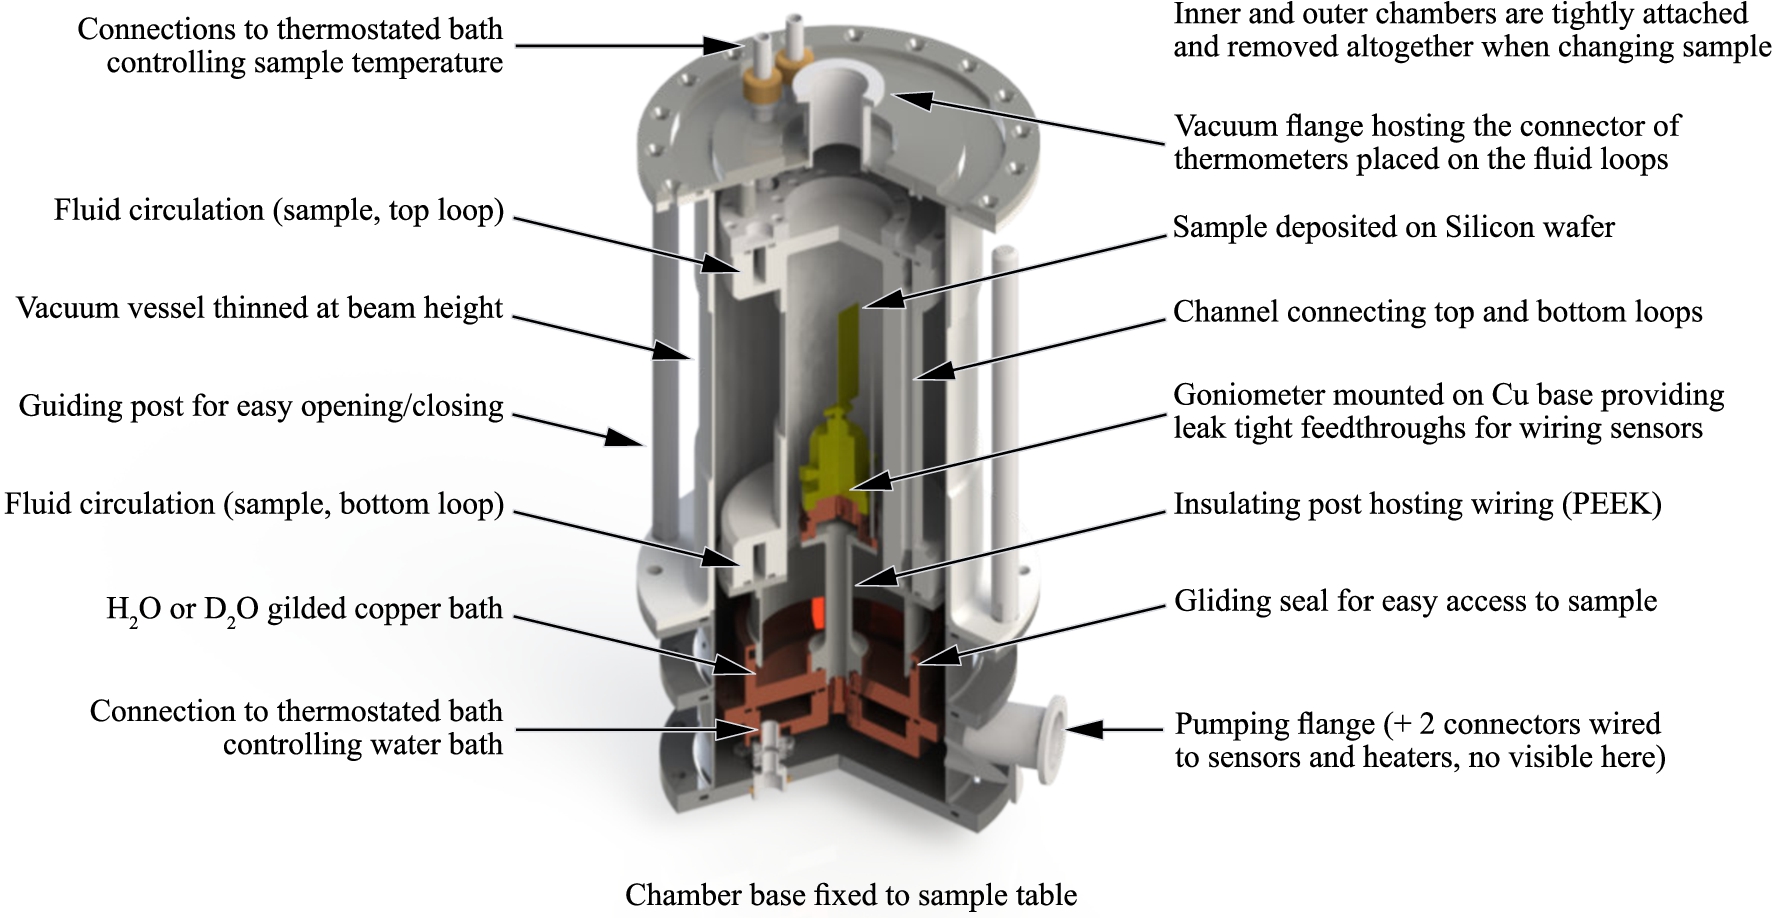 CAD design of the humidity chamber showing internal parts. The temperature of the water bath is controlled with a thermostated bath connected to the chamber base. The sample, mounted on a goniometer insulated from the water bath, is thermalised with a second thermostated bath connected at the top of the chamber.